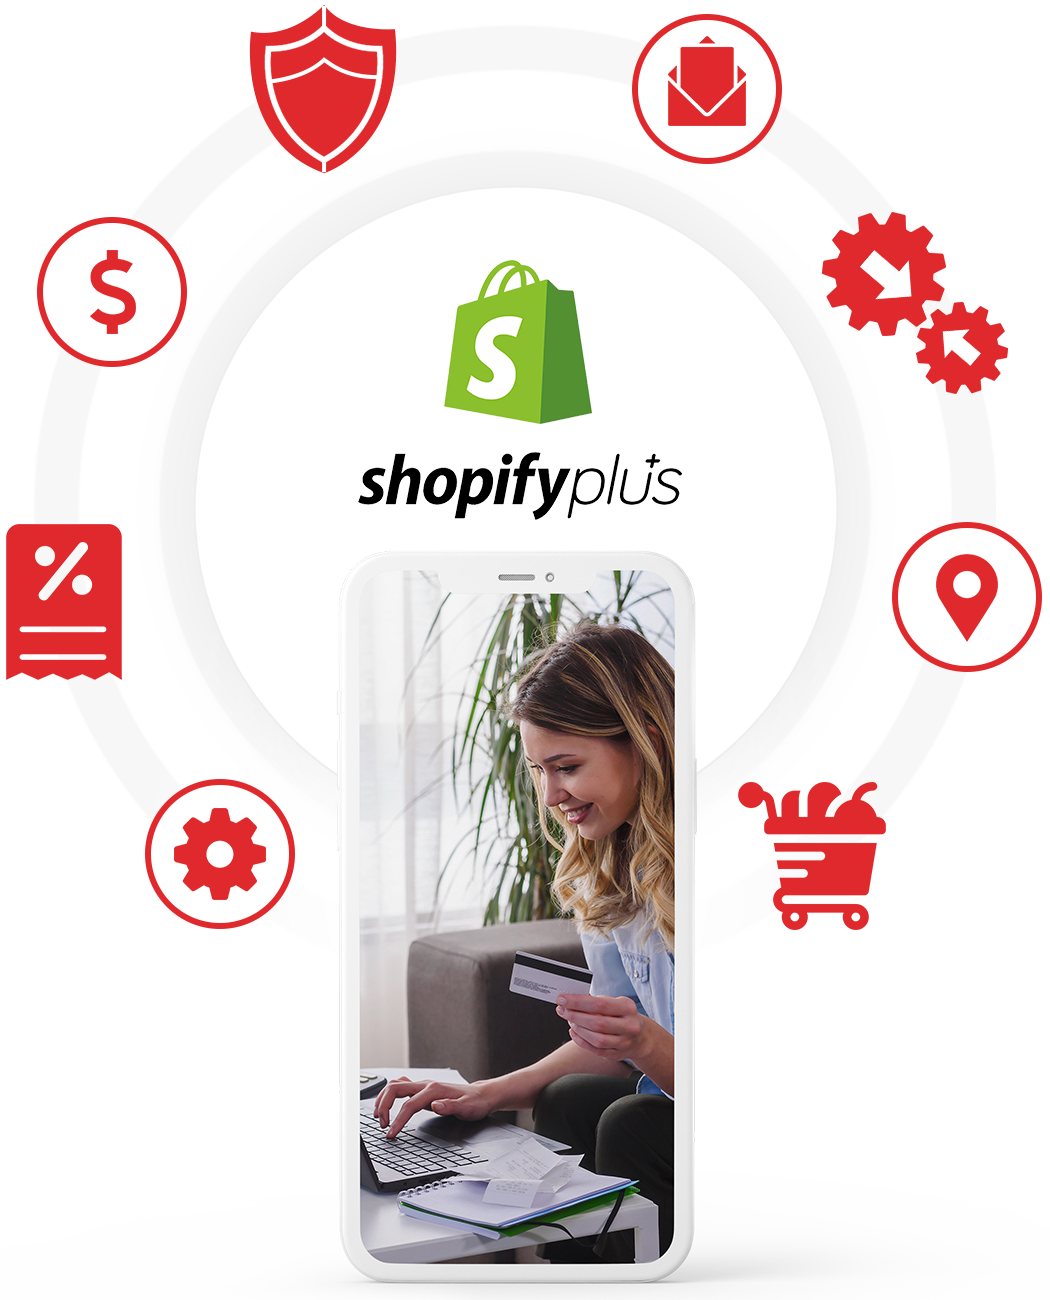 shopify plus ecommerce, shopify plus support